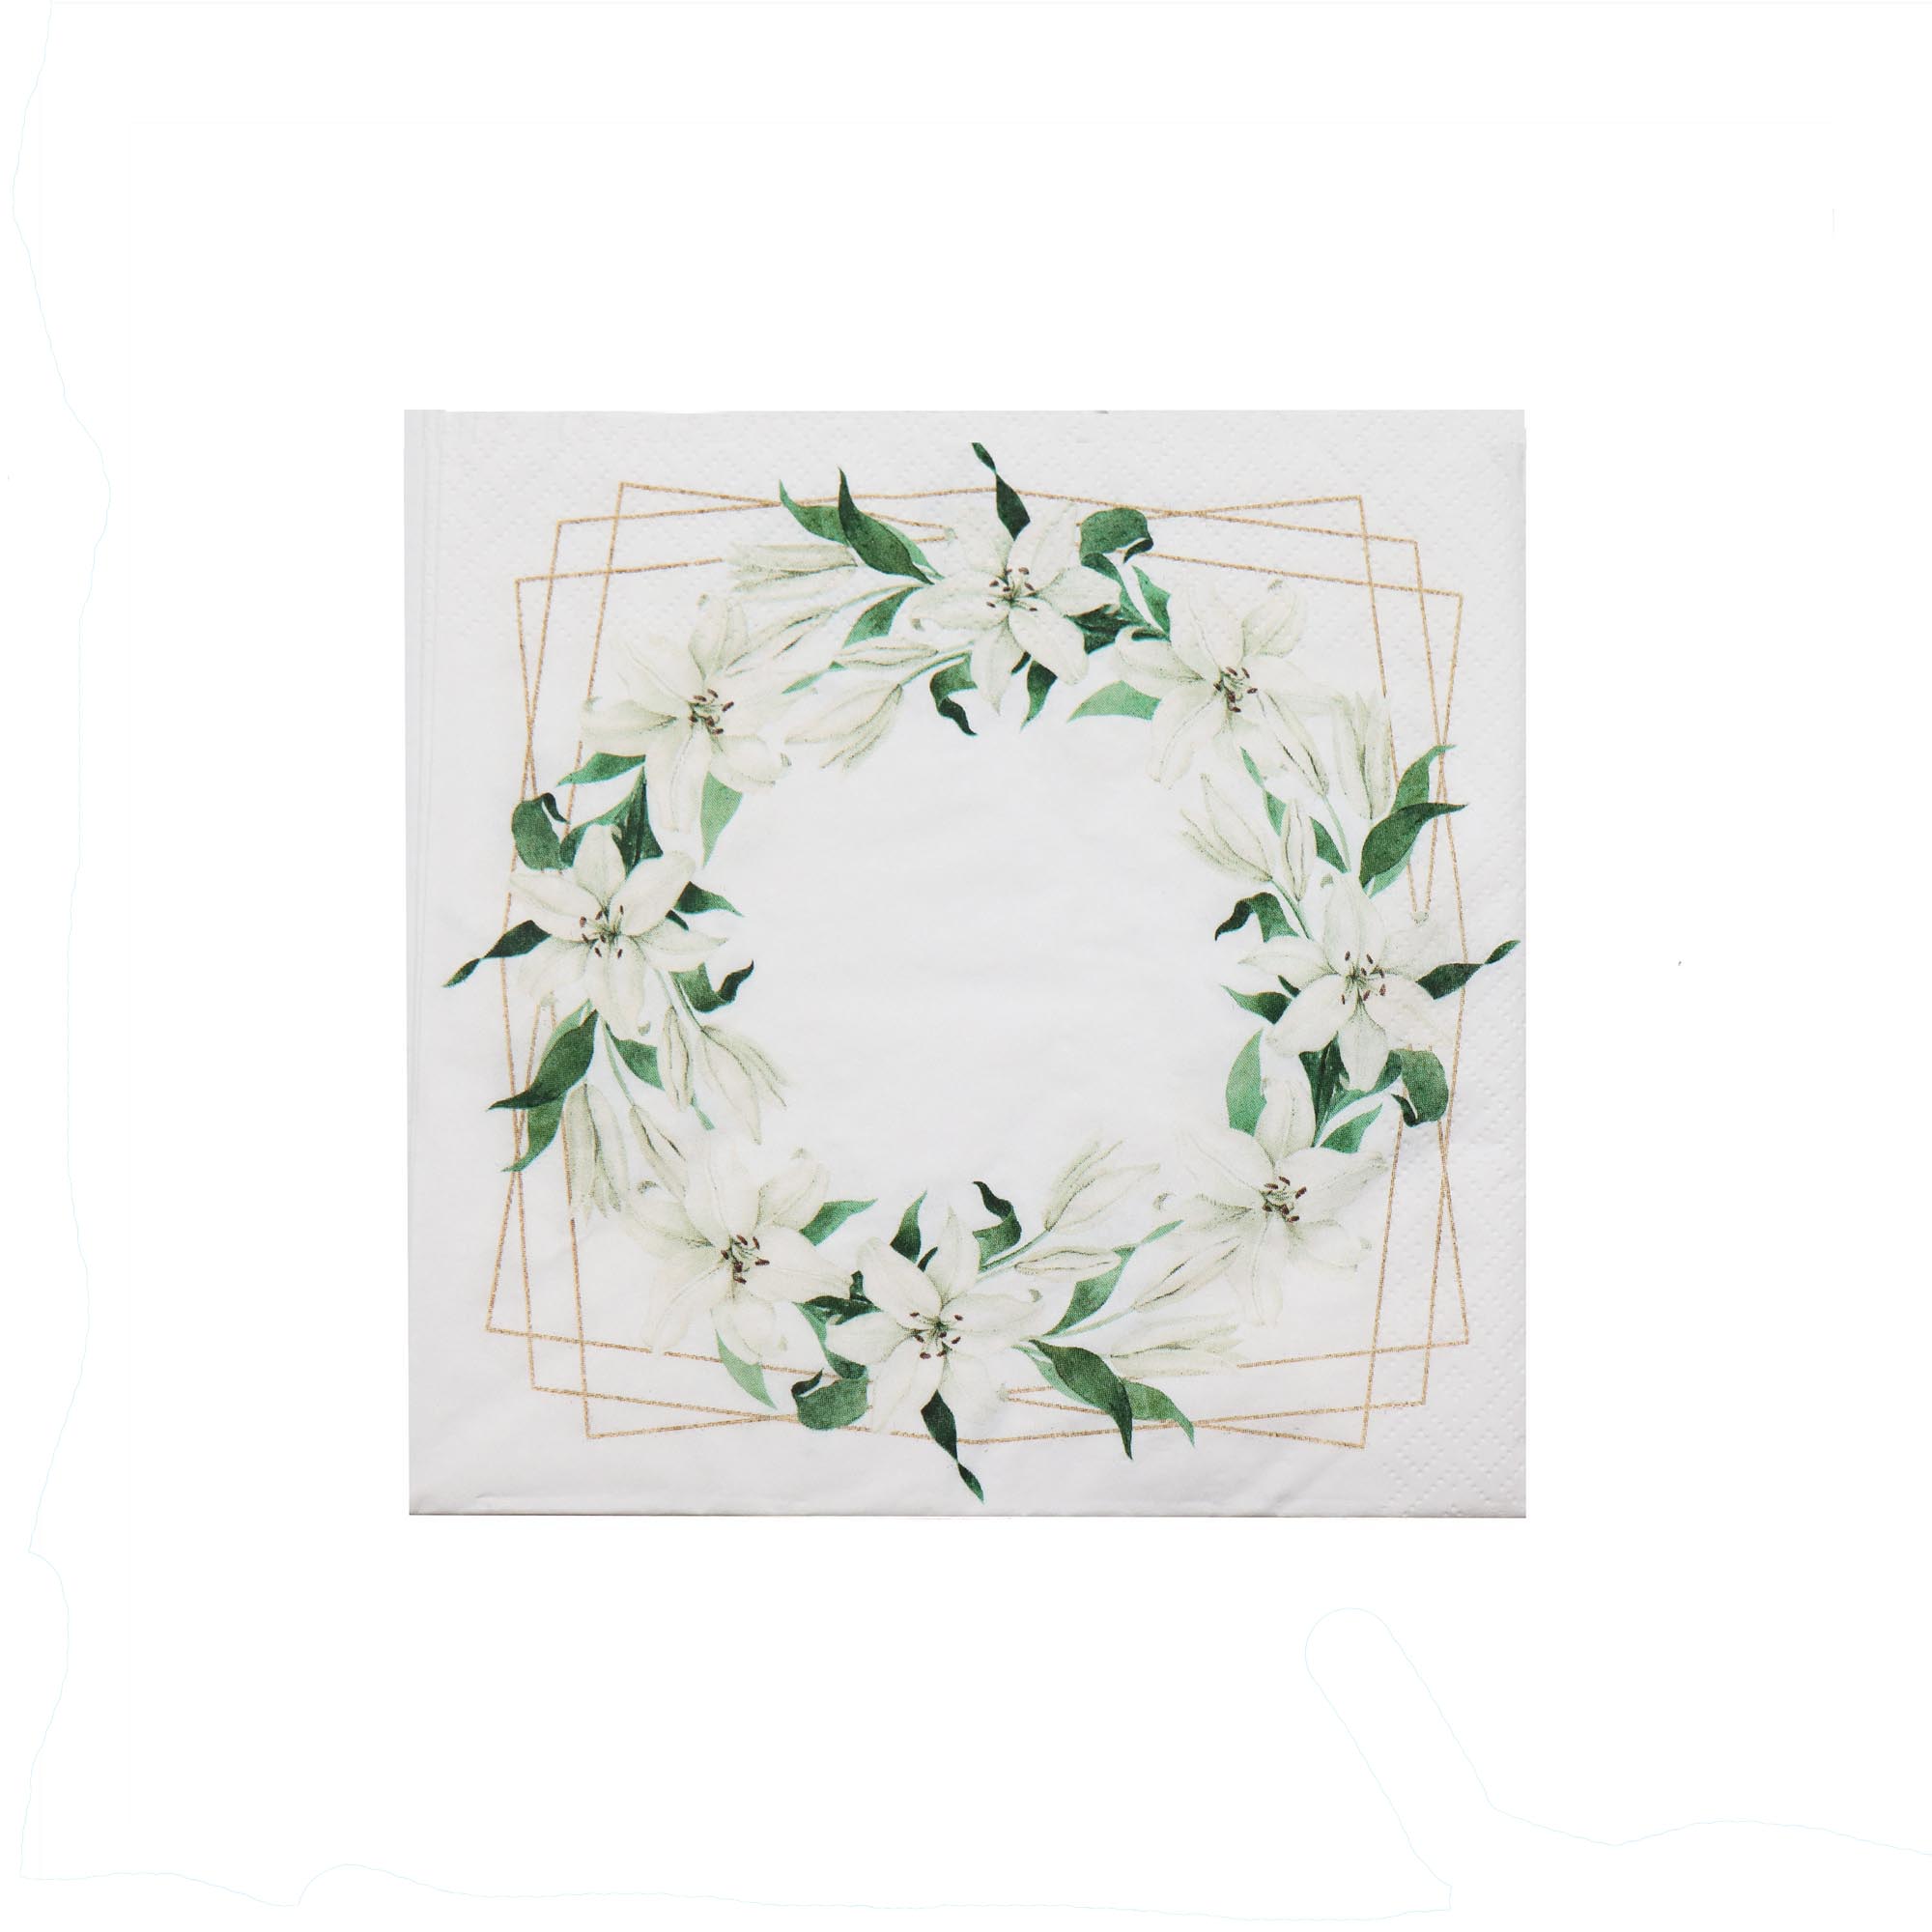 Luncheon Table Serviettes 3ply 33x33cm White Flower 20pack